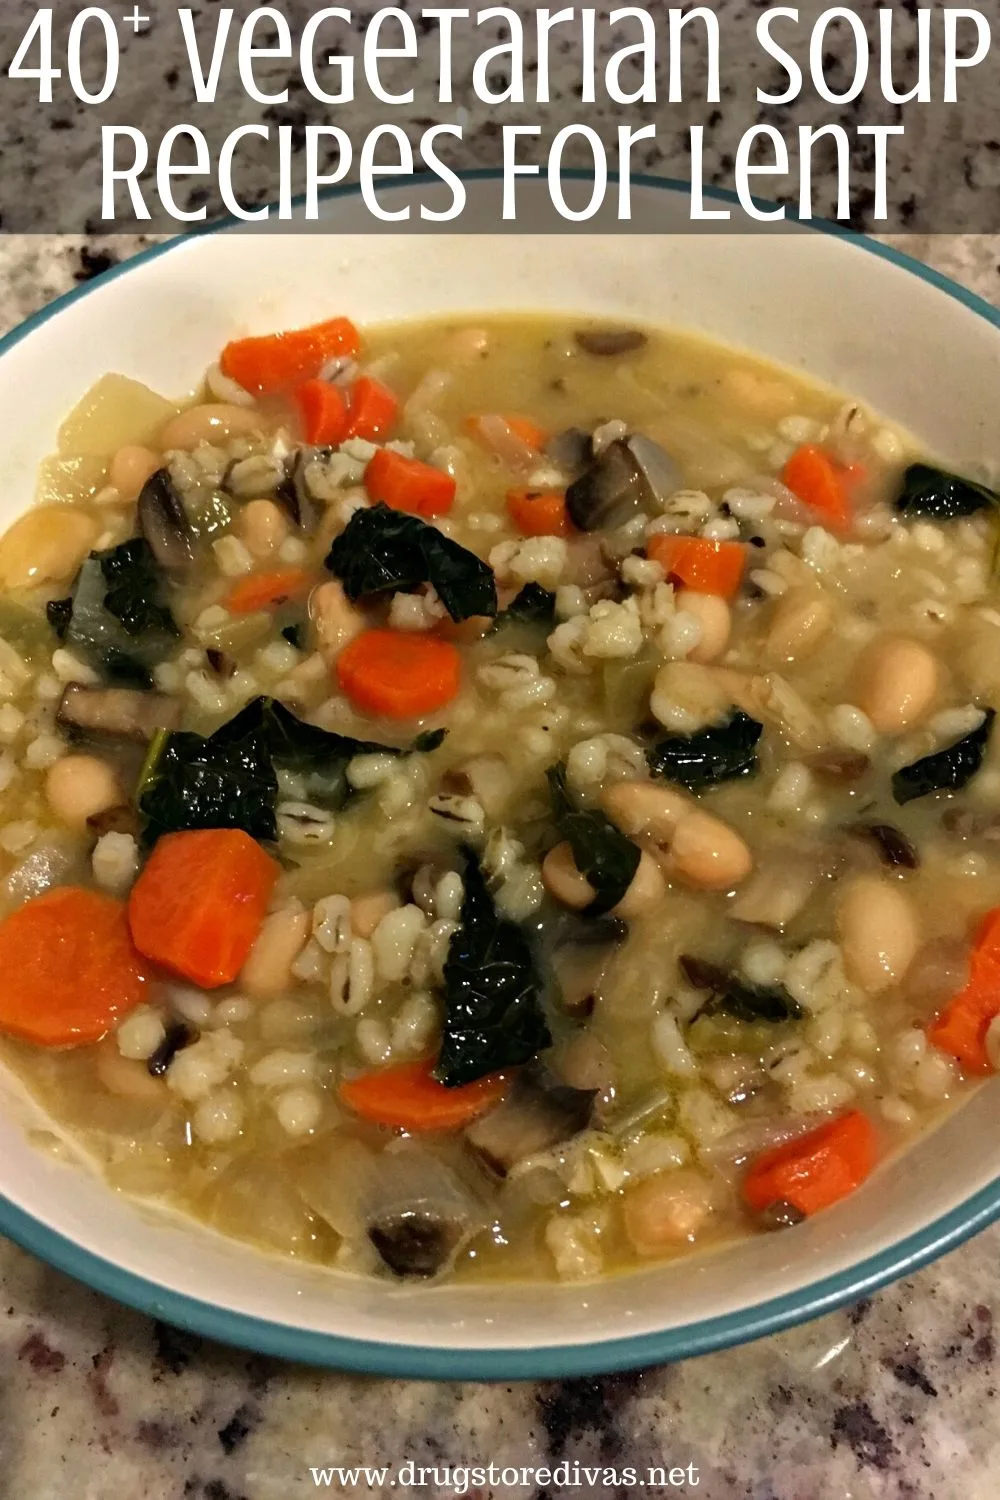 You can still have soup on Fridays during Lent. Just pick one of these 40+ Vegetarian Soup Recipes For Lent on www.drugstoredivas.net.